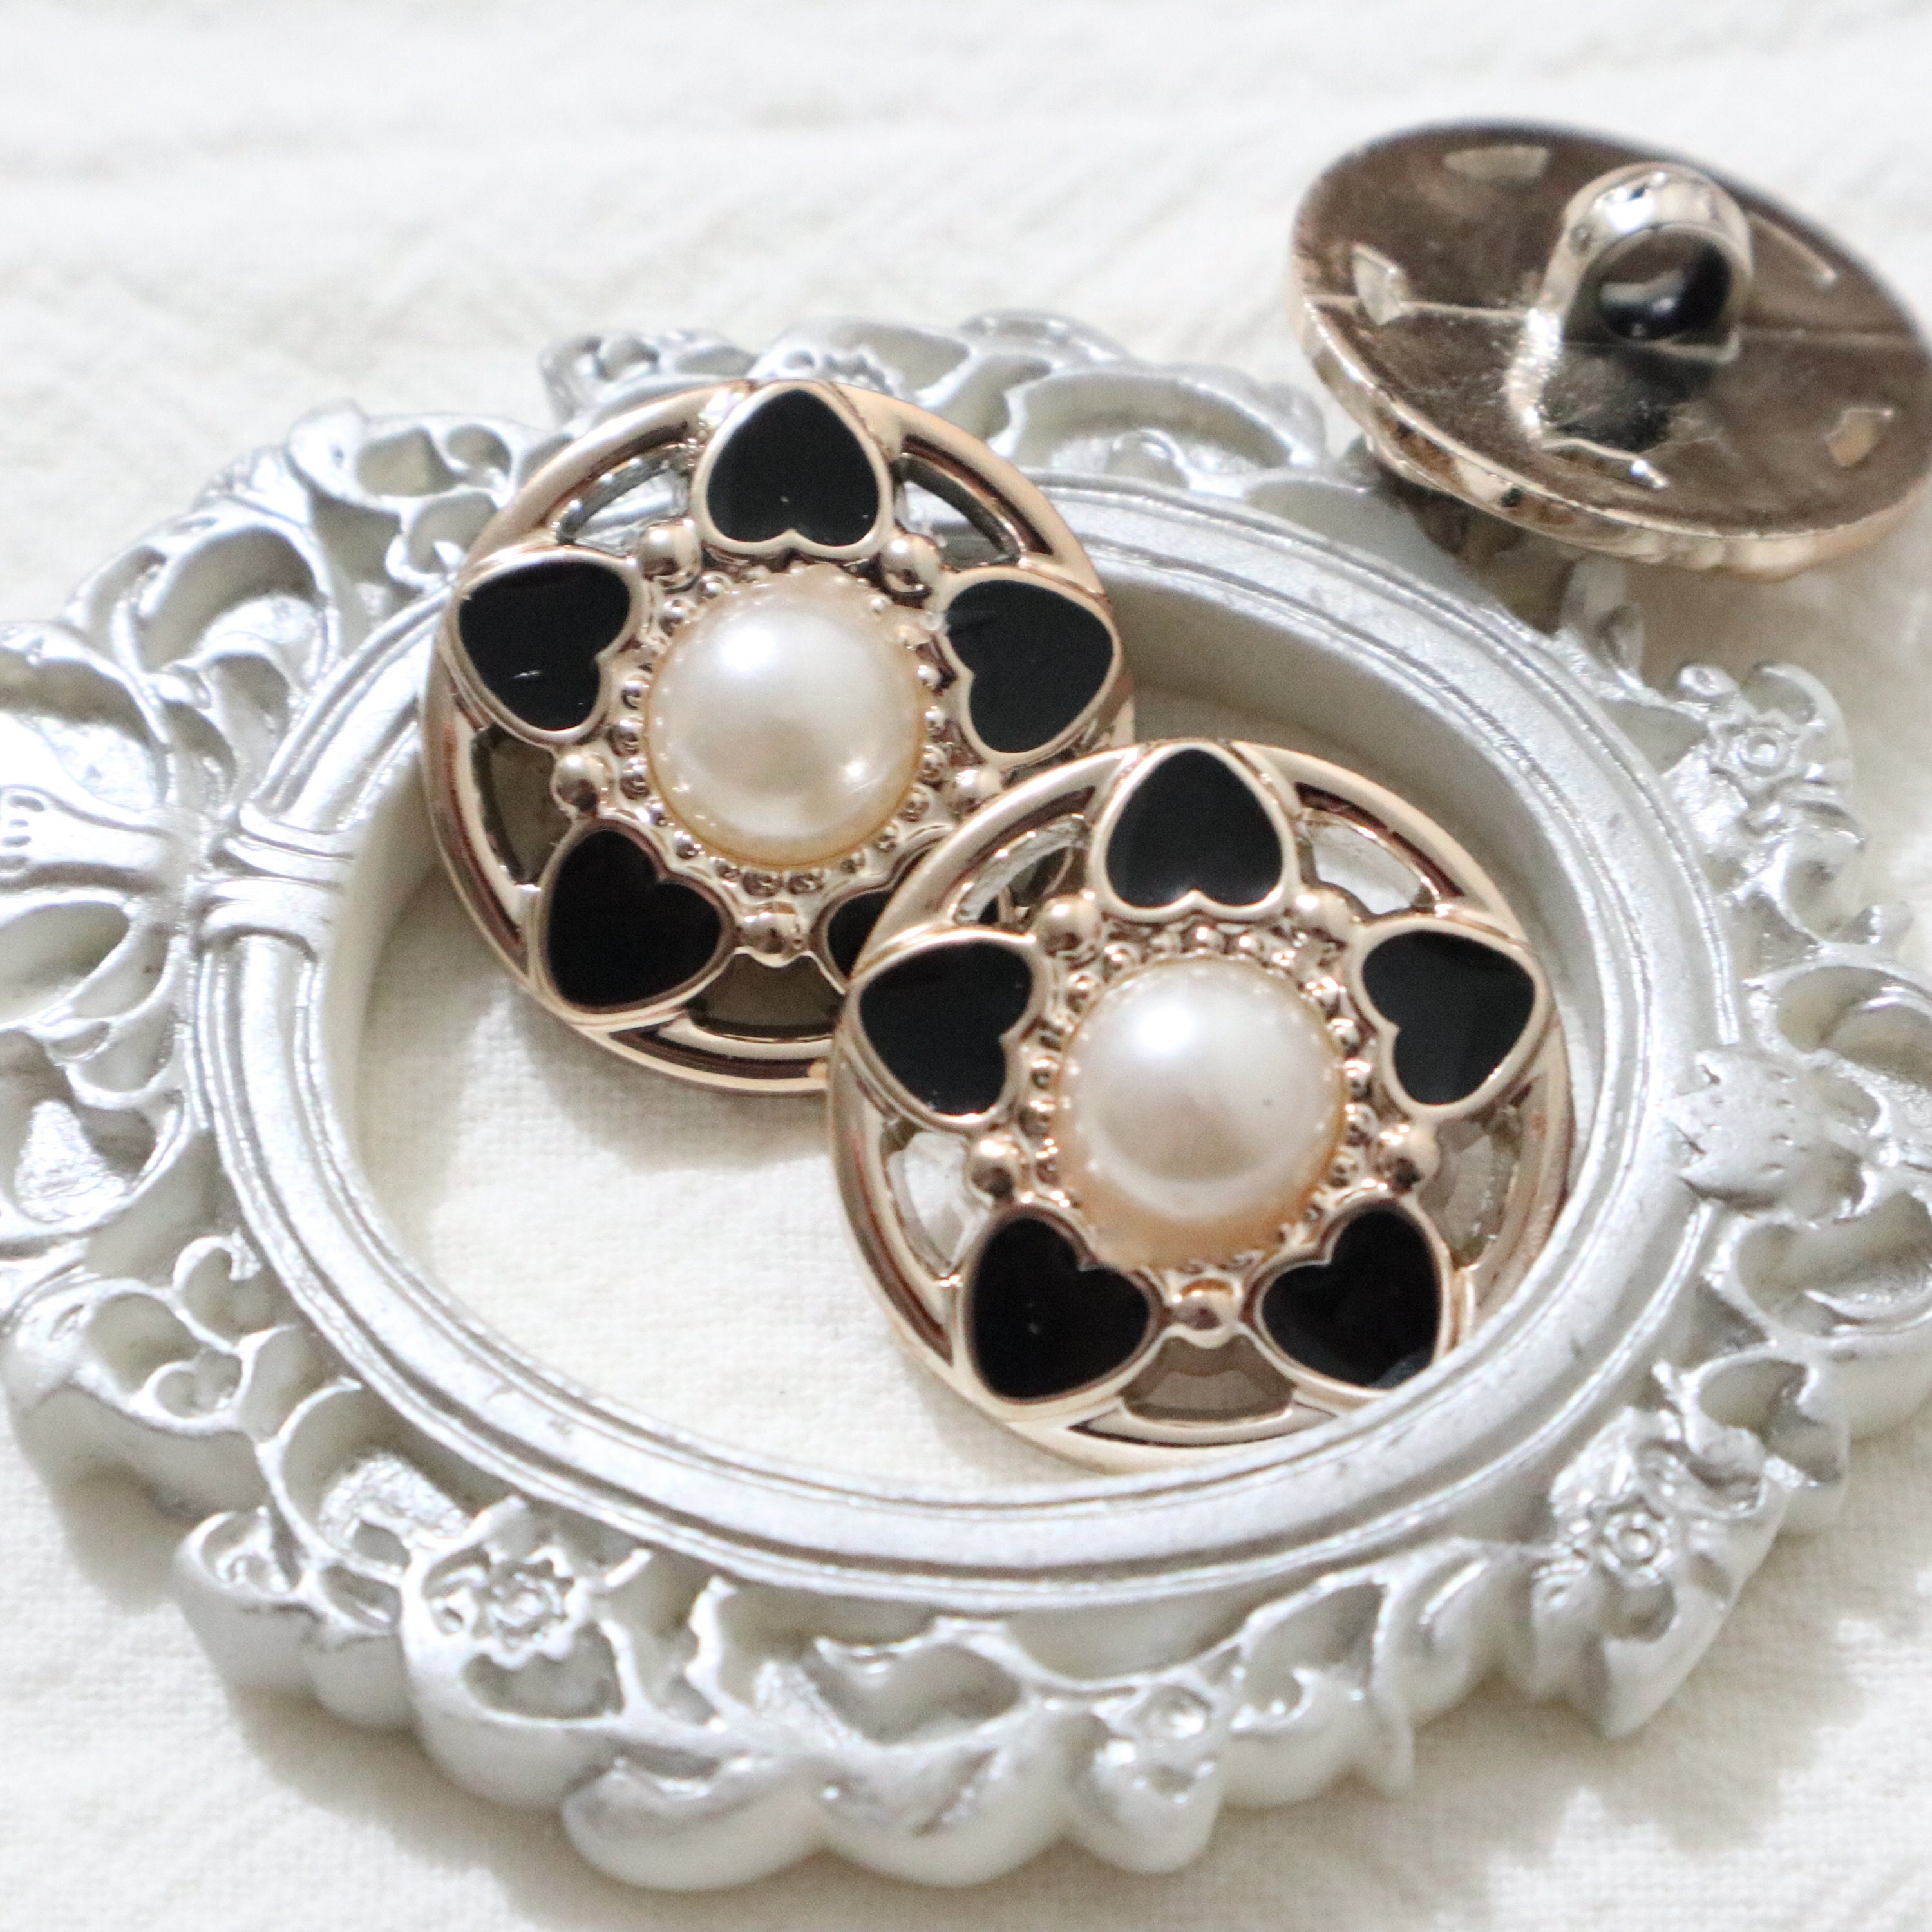 24mm Metal Shank Buttons, Pearl Buttons, Vintage Style Buttons